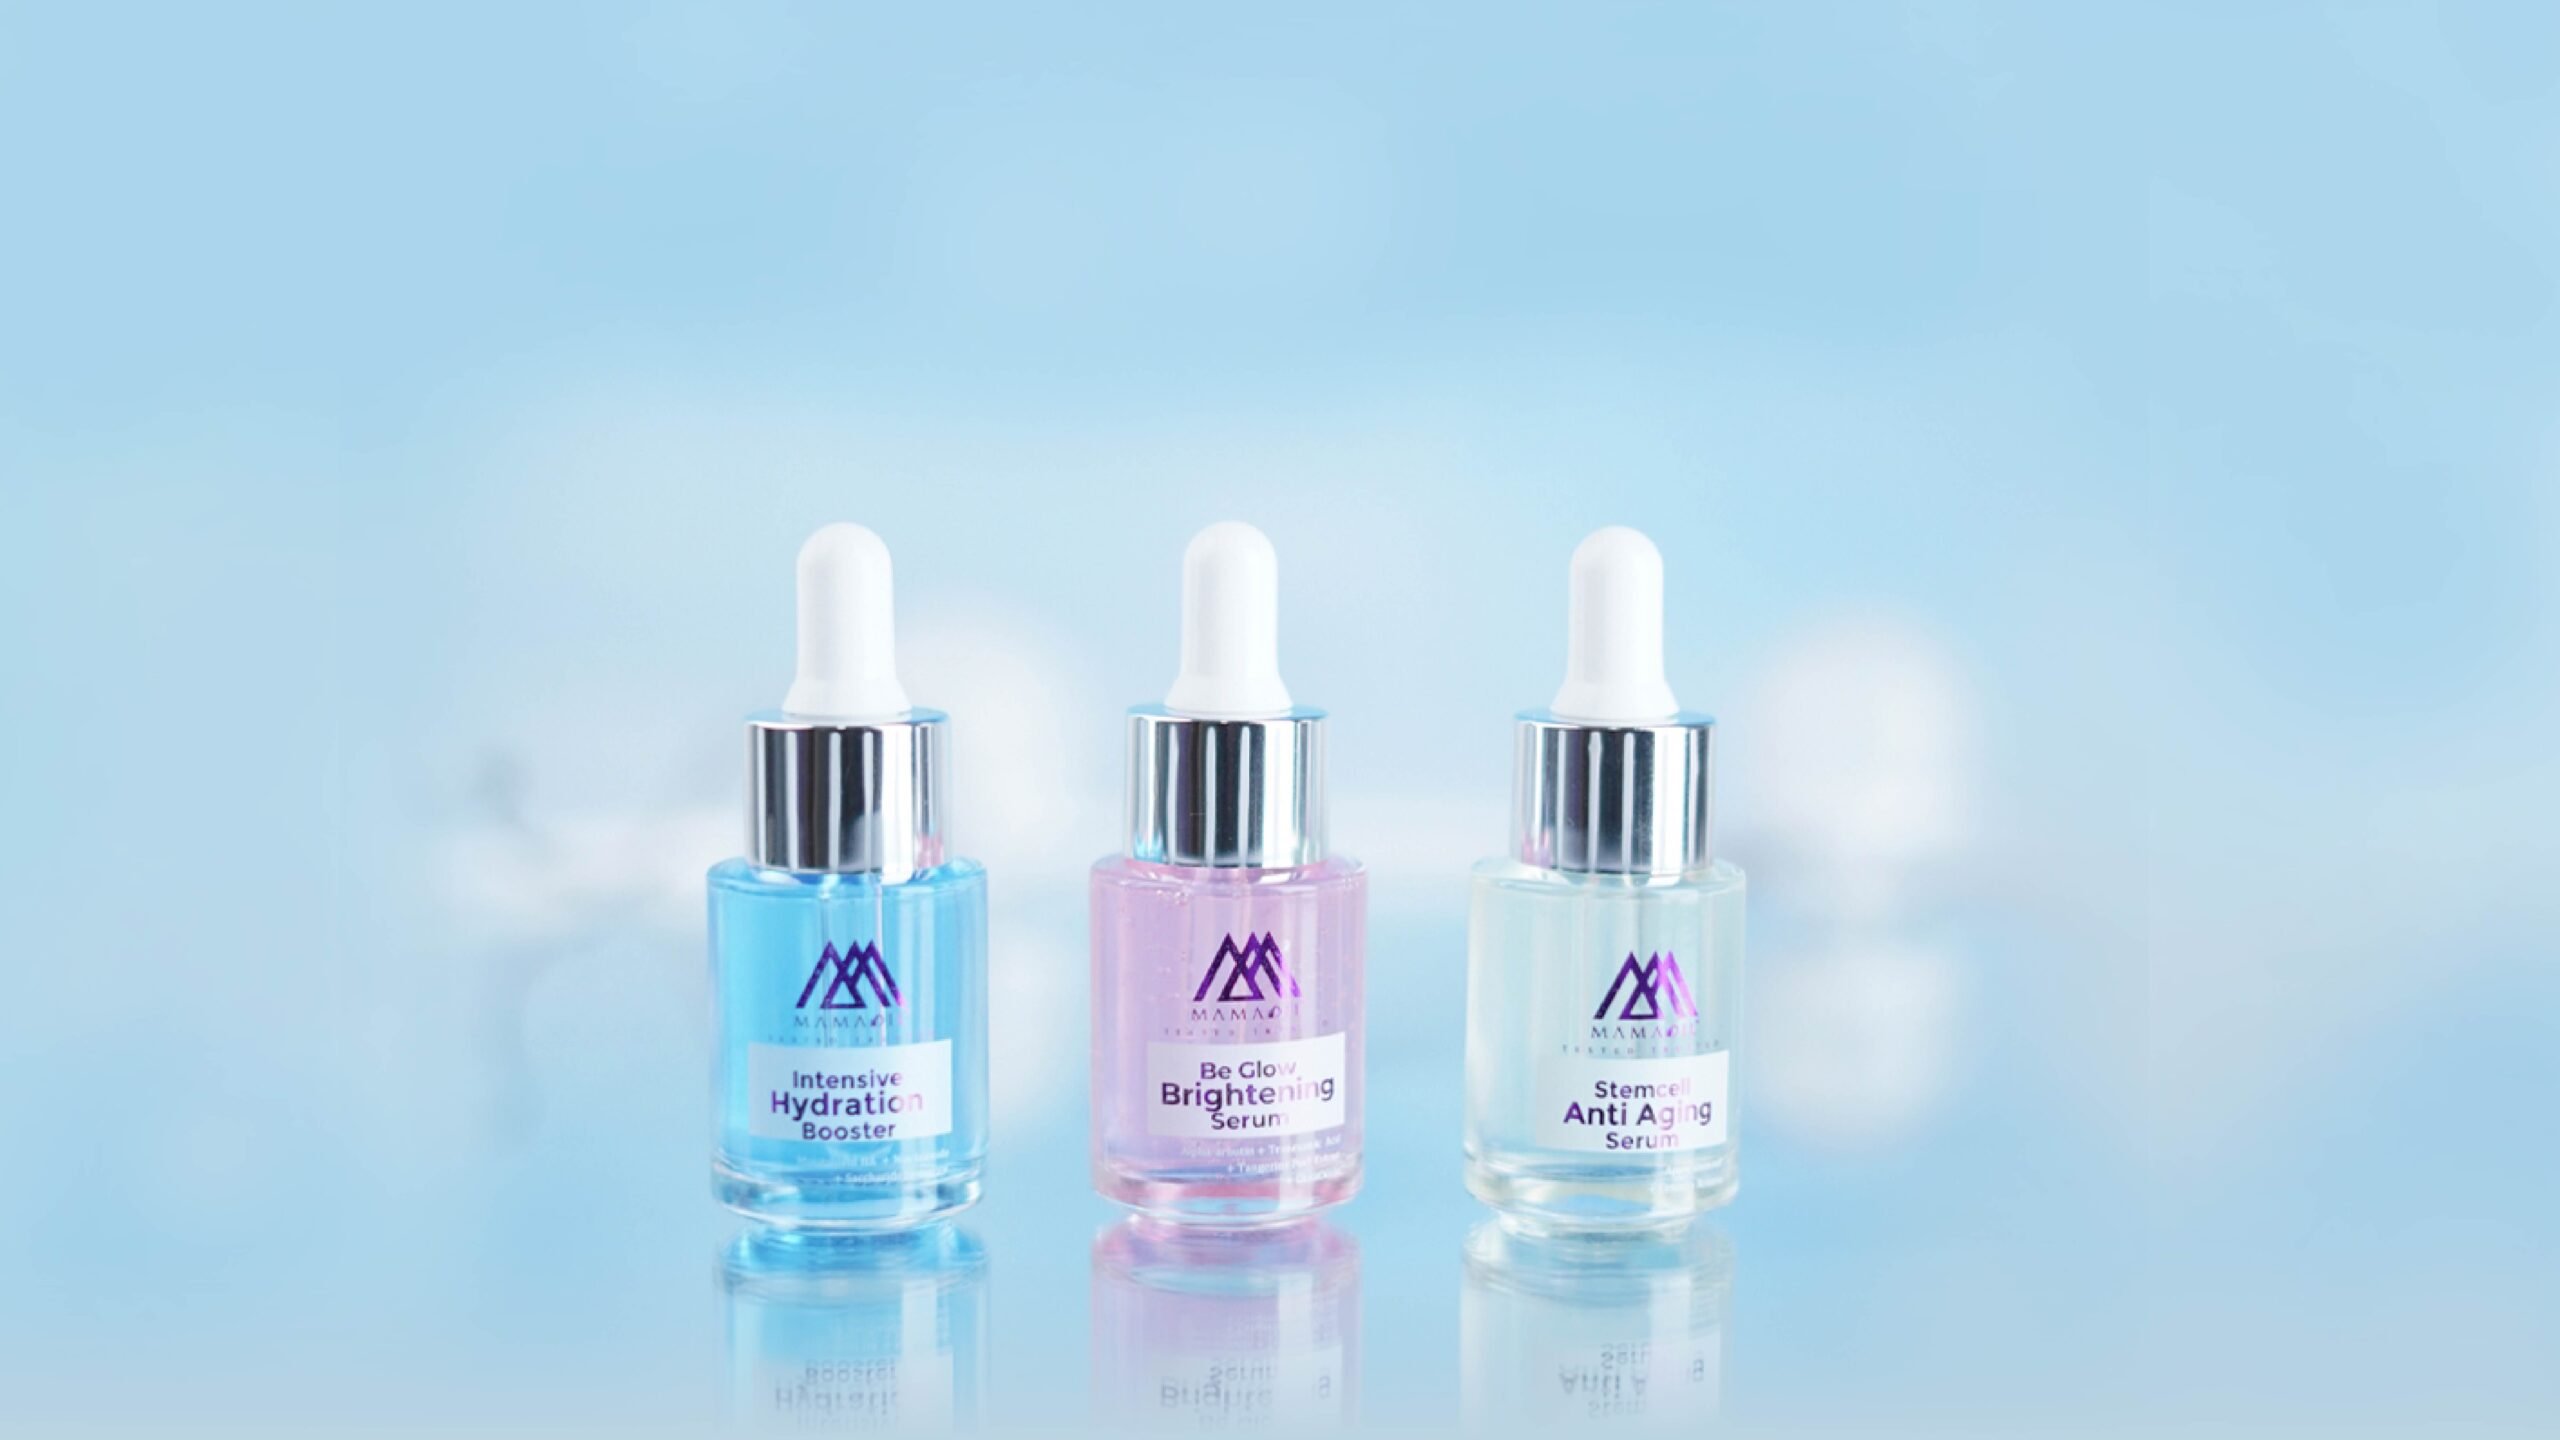 Trio Age Defying Booster Serum Mamadil